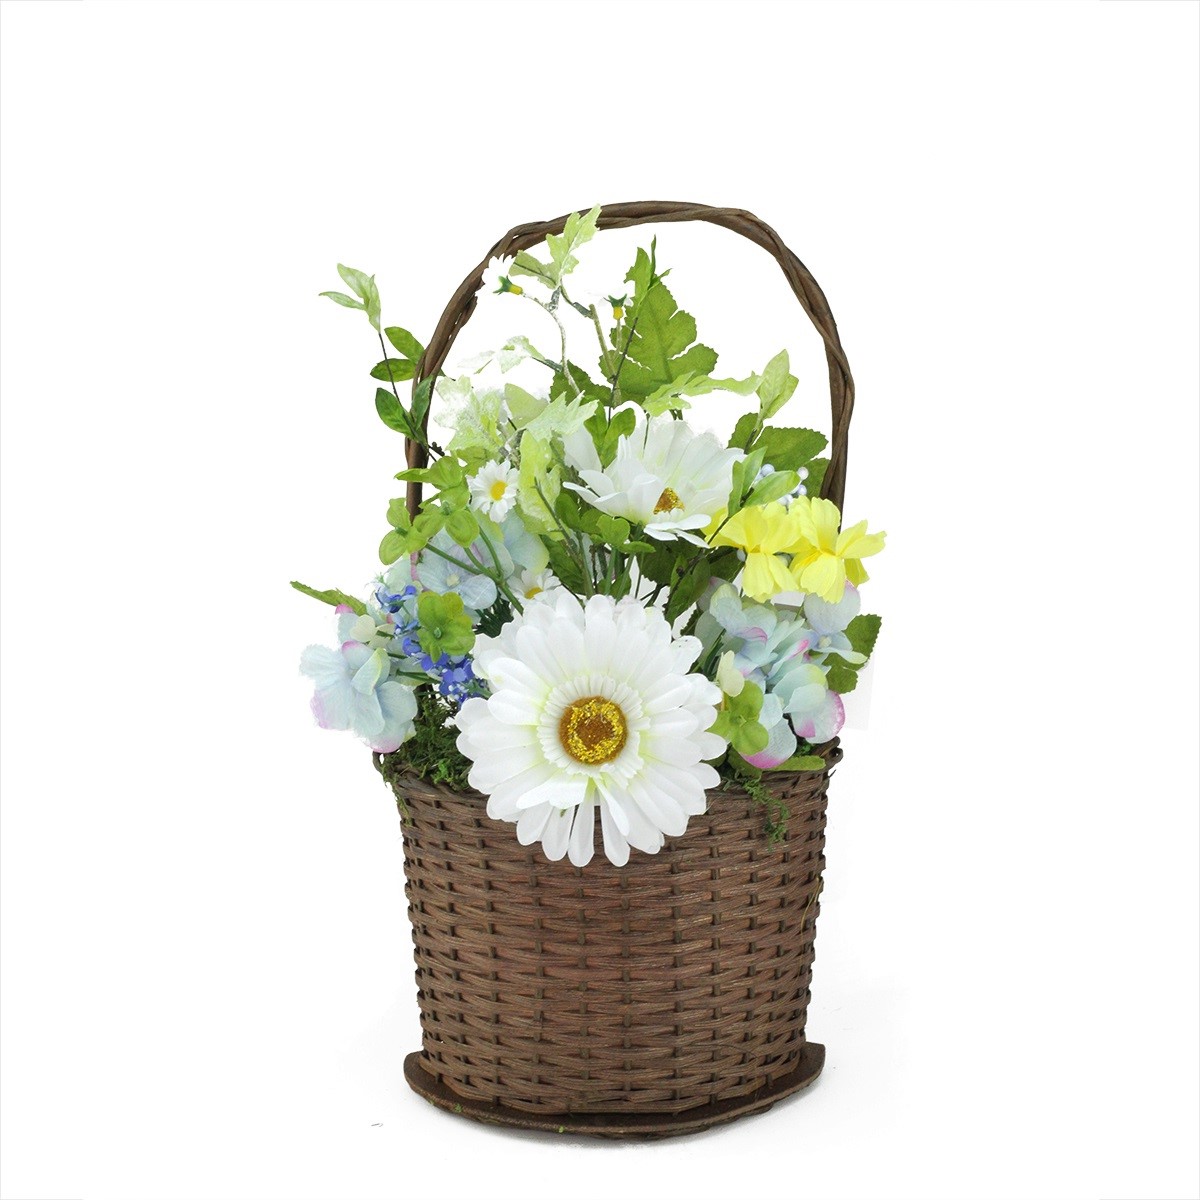 Darice 14.5" Blue and White Mixed Flower Artificial Spring Floral Arrangement with Basket